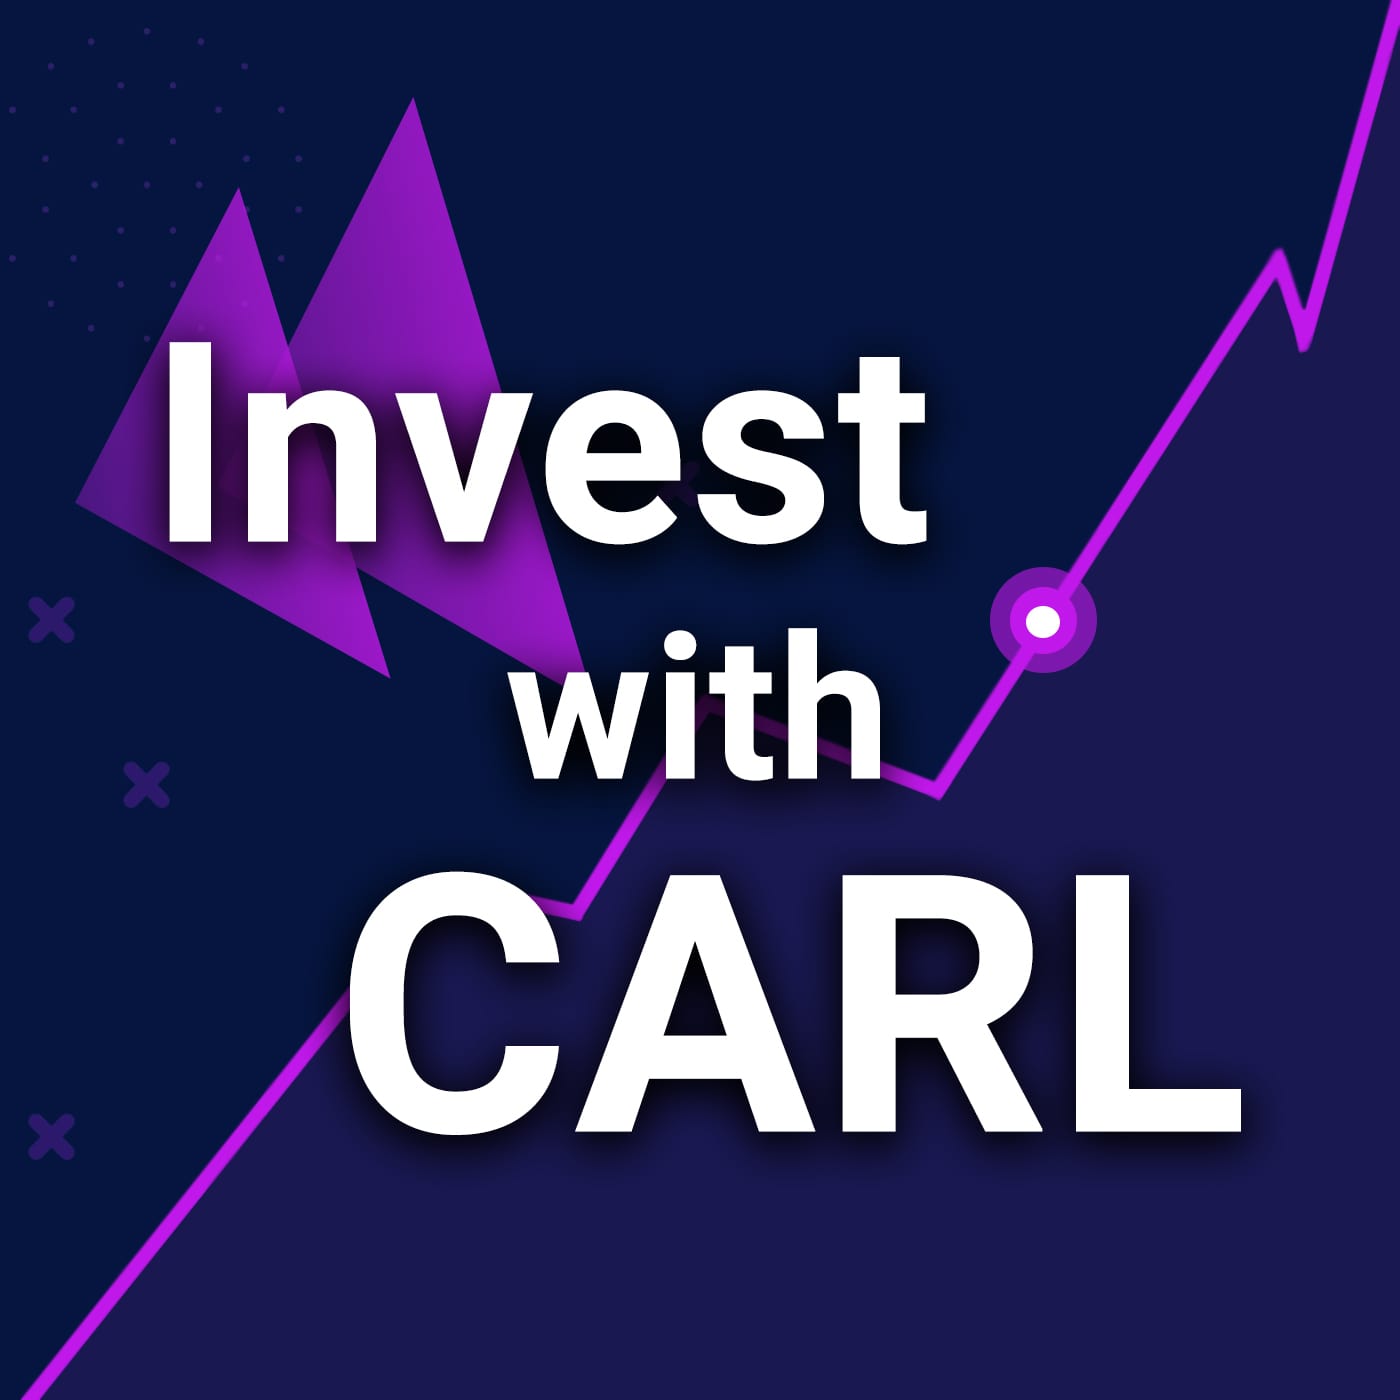 Why Did You Invest? A Current Investor’s Experience with CARL